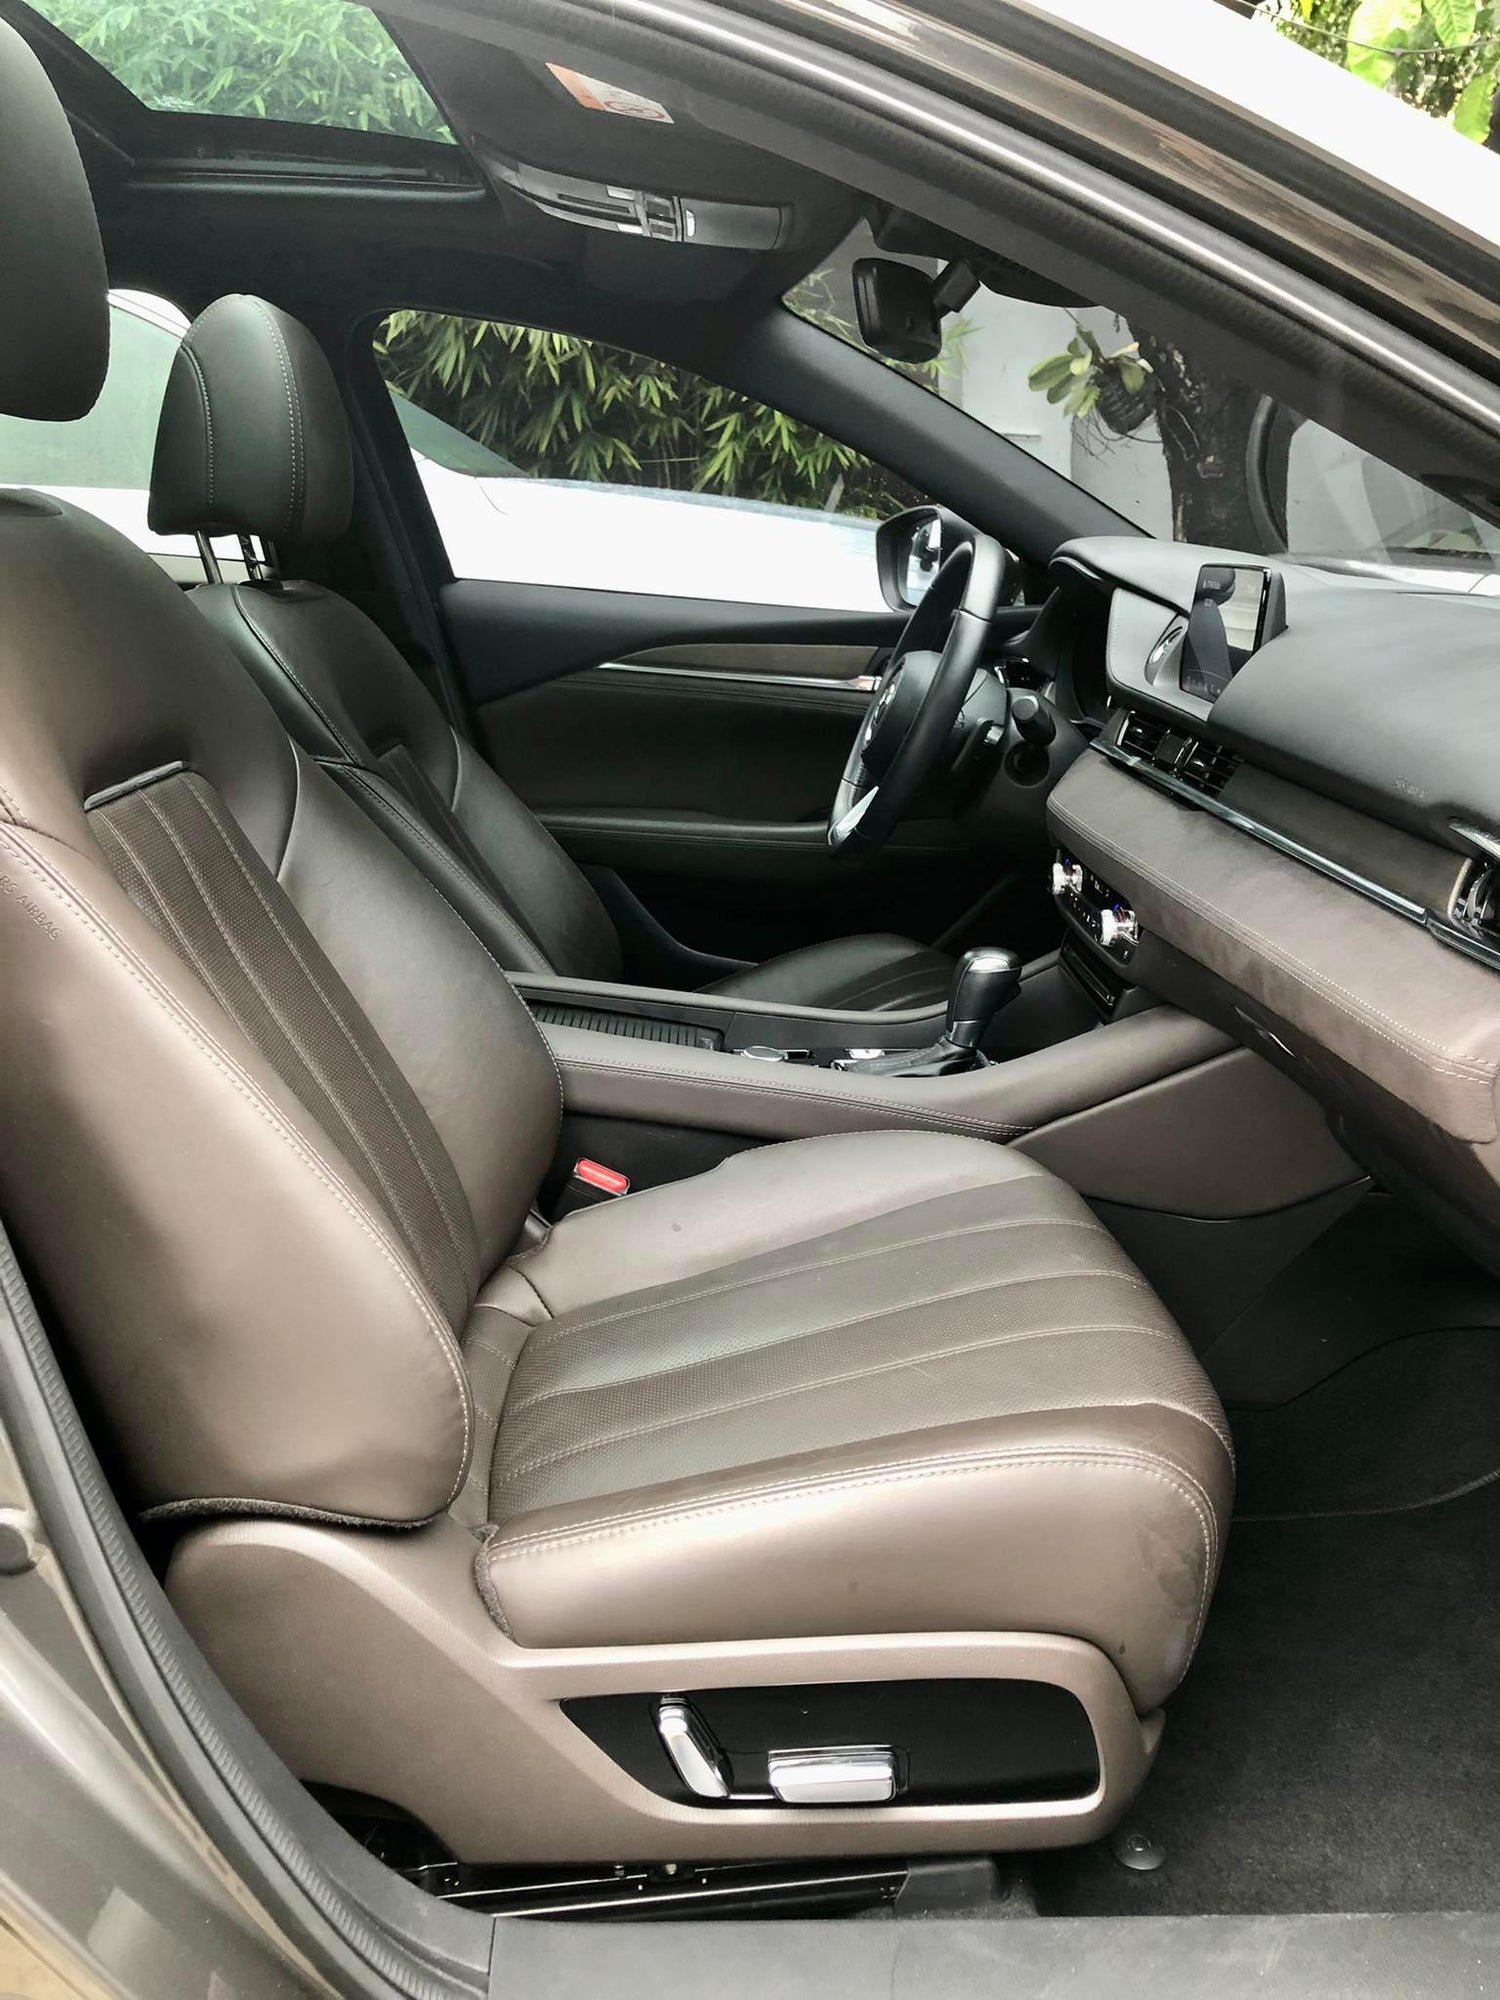 2021 MAZDA 6 2.5L WAGON AUTOMATIC TRANSMISSION | Secondhand Used Cars for Sale at Manila Auto Display.